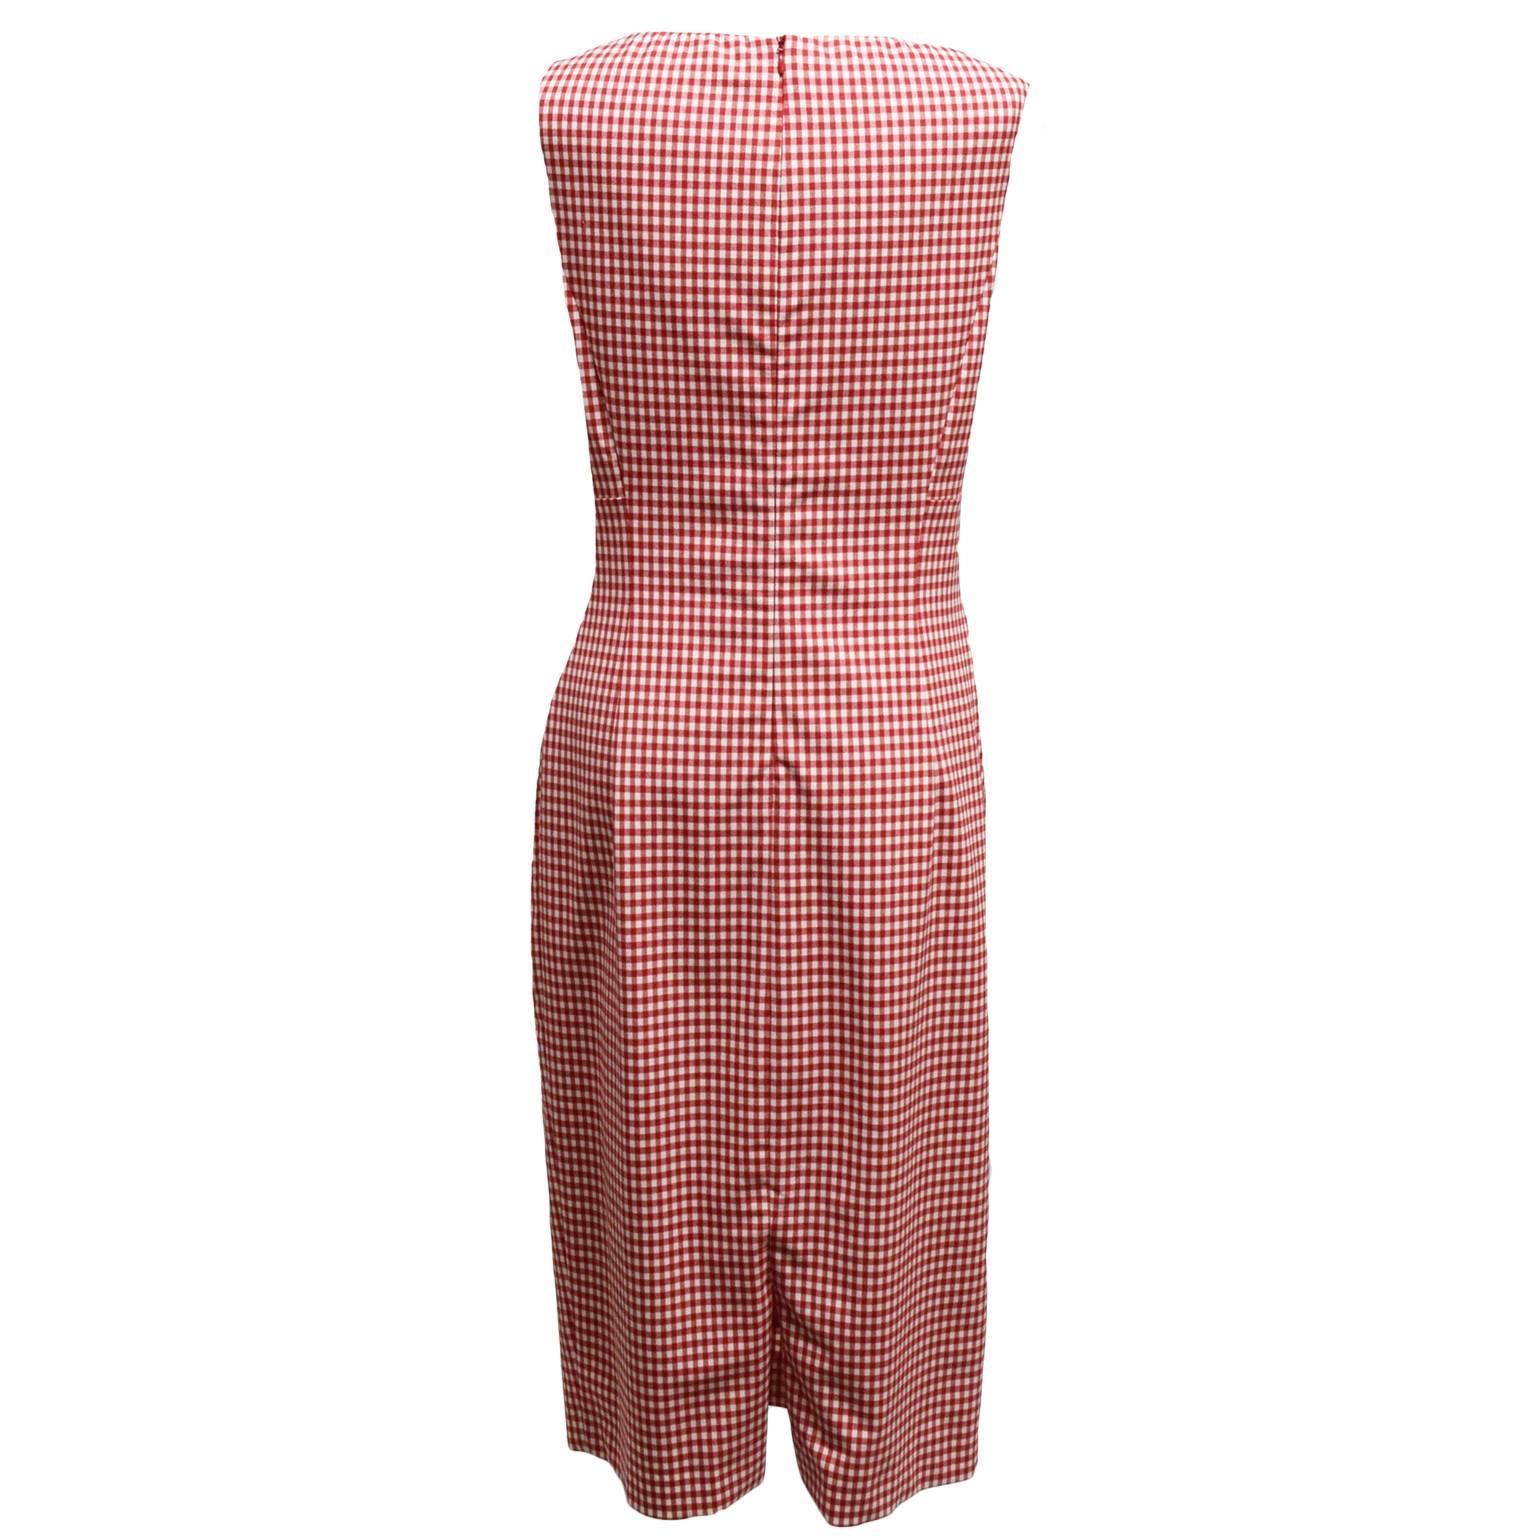 This Michael Kors dress is great for summer. Made from 100% cotton, this dress is a red and white printed gingham. The bodice is a wrapped like look while the neckline is a slight v-neck. The back has a zipped closure. 